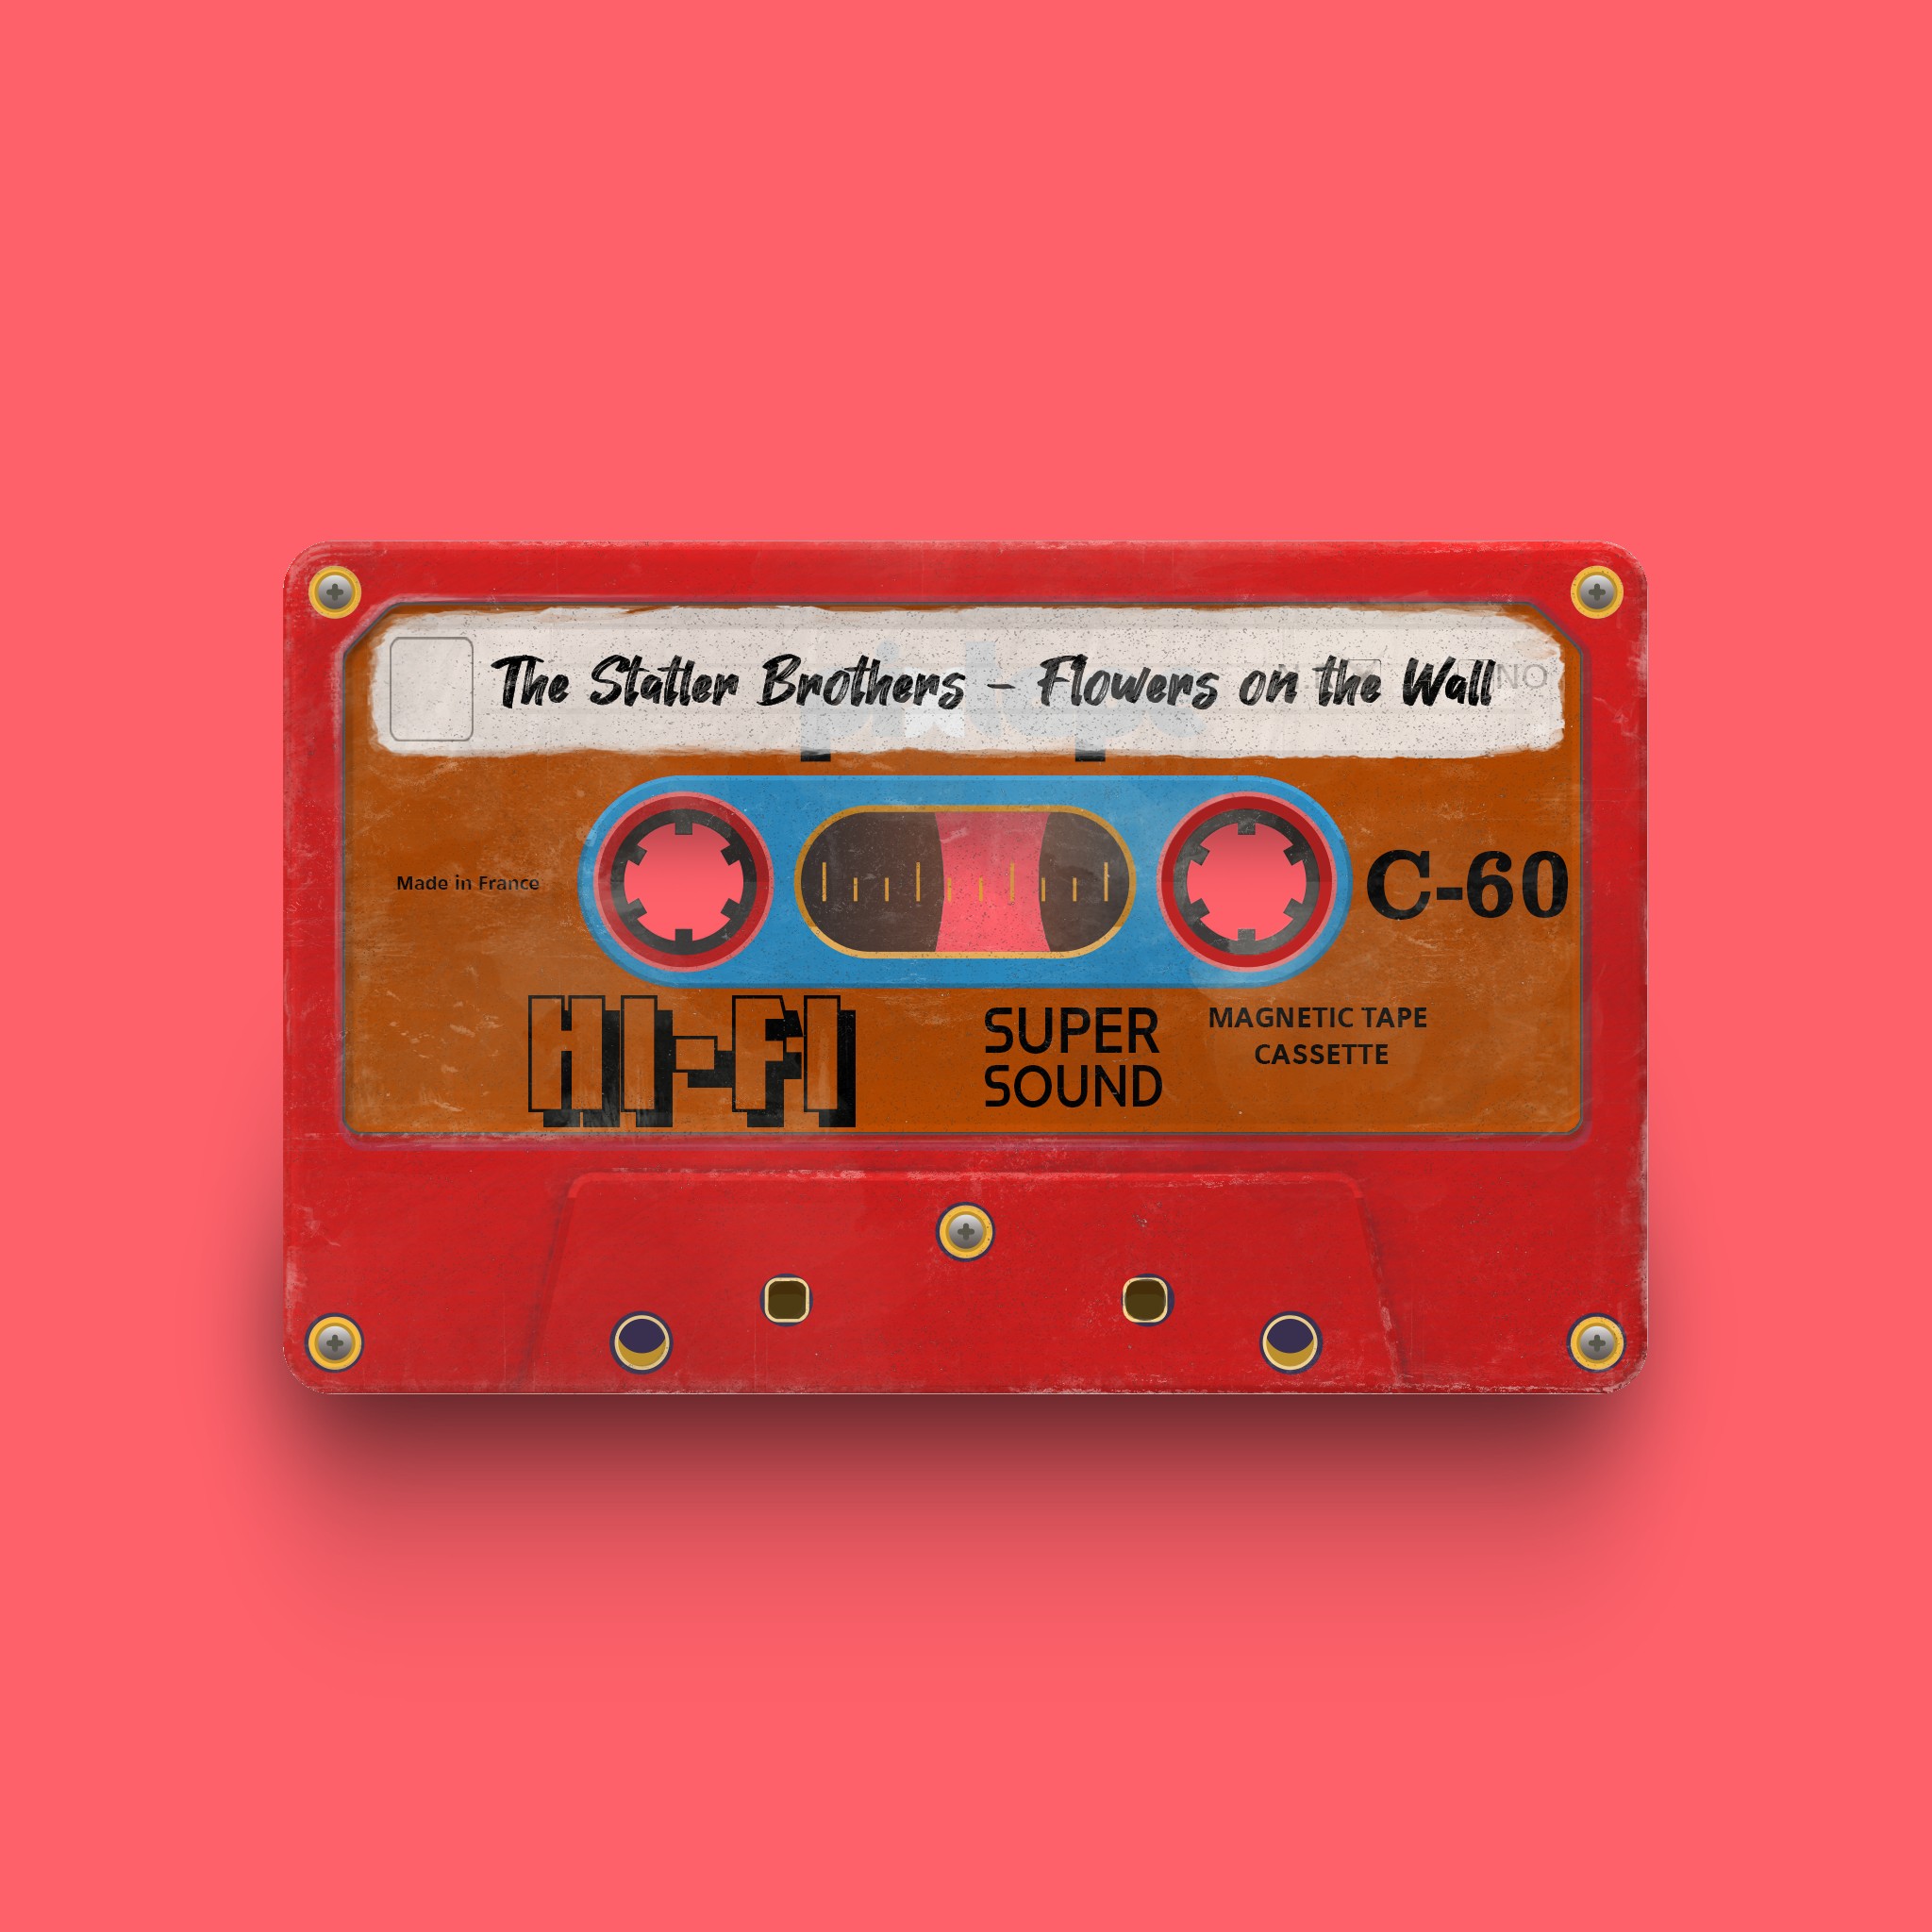 PixTape #9996 | The Statler Brothers - Flowers on the Wall